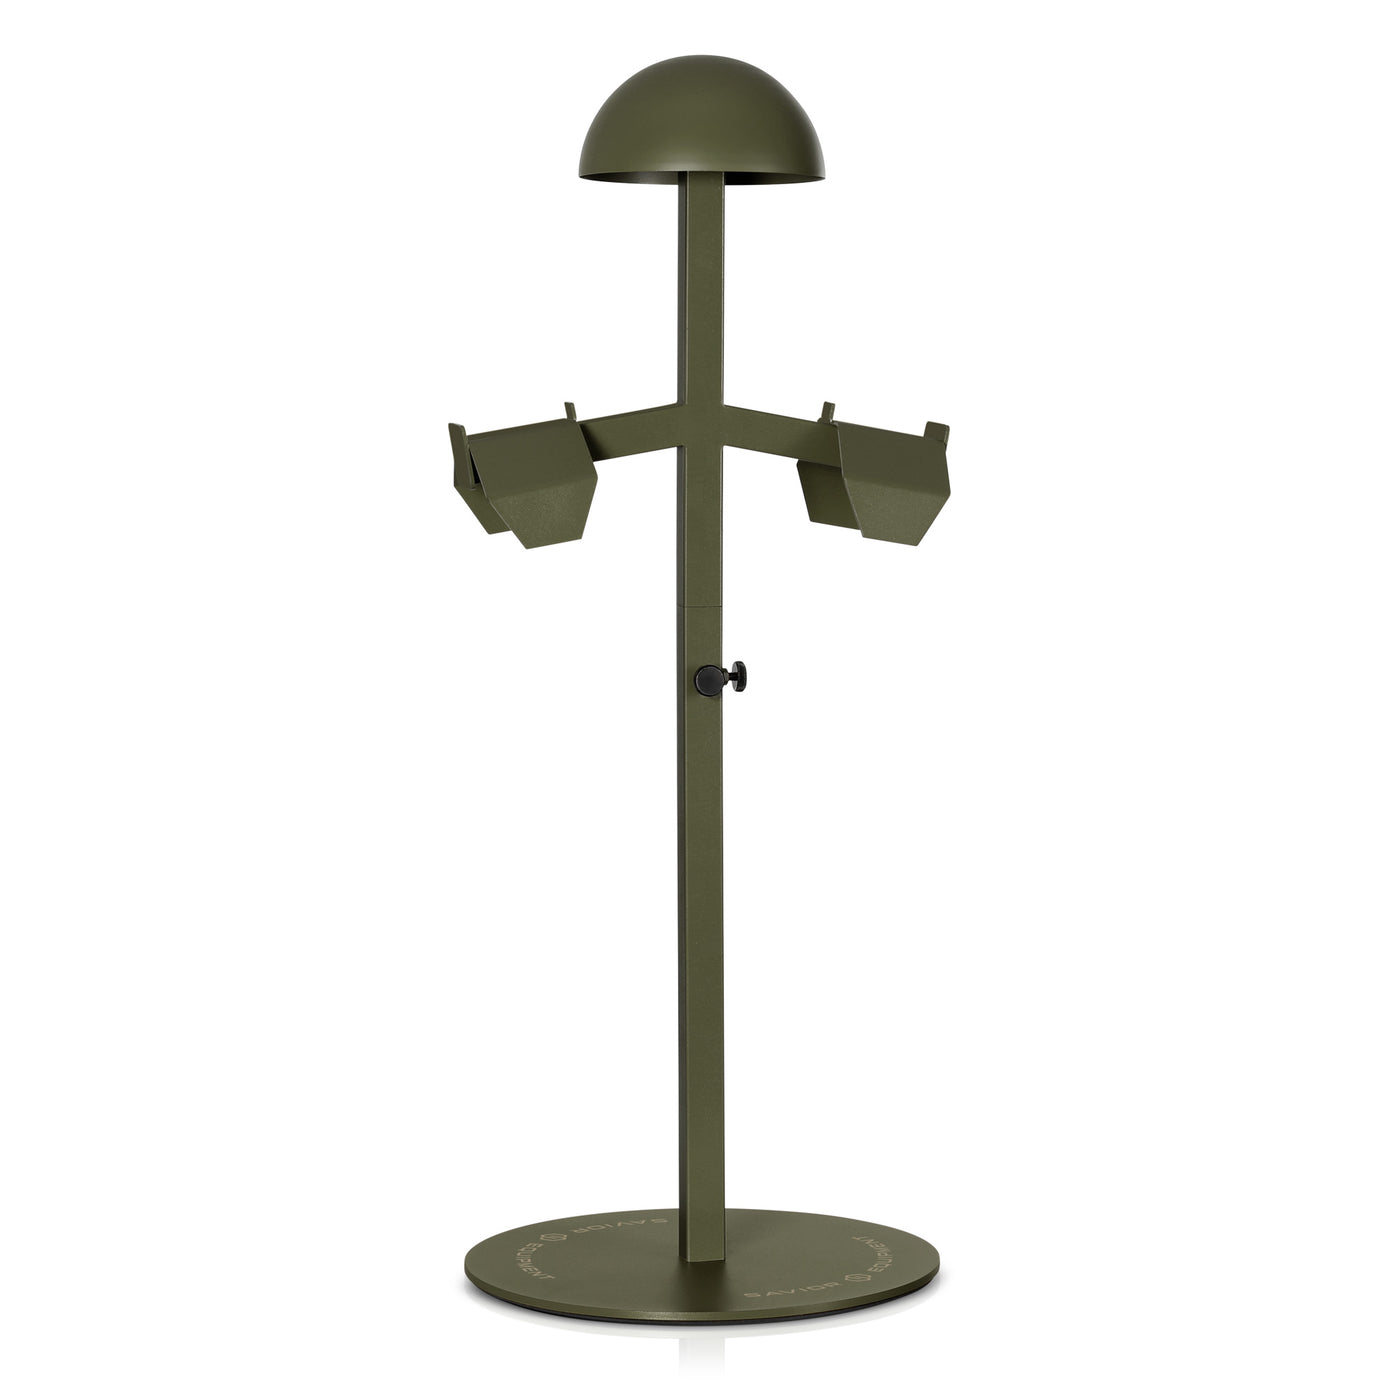 H.P.C Rack - Tactical Gear Tabletop Stand - Green